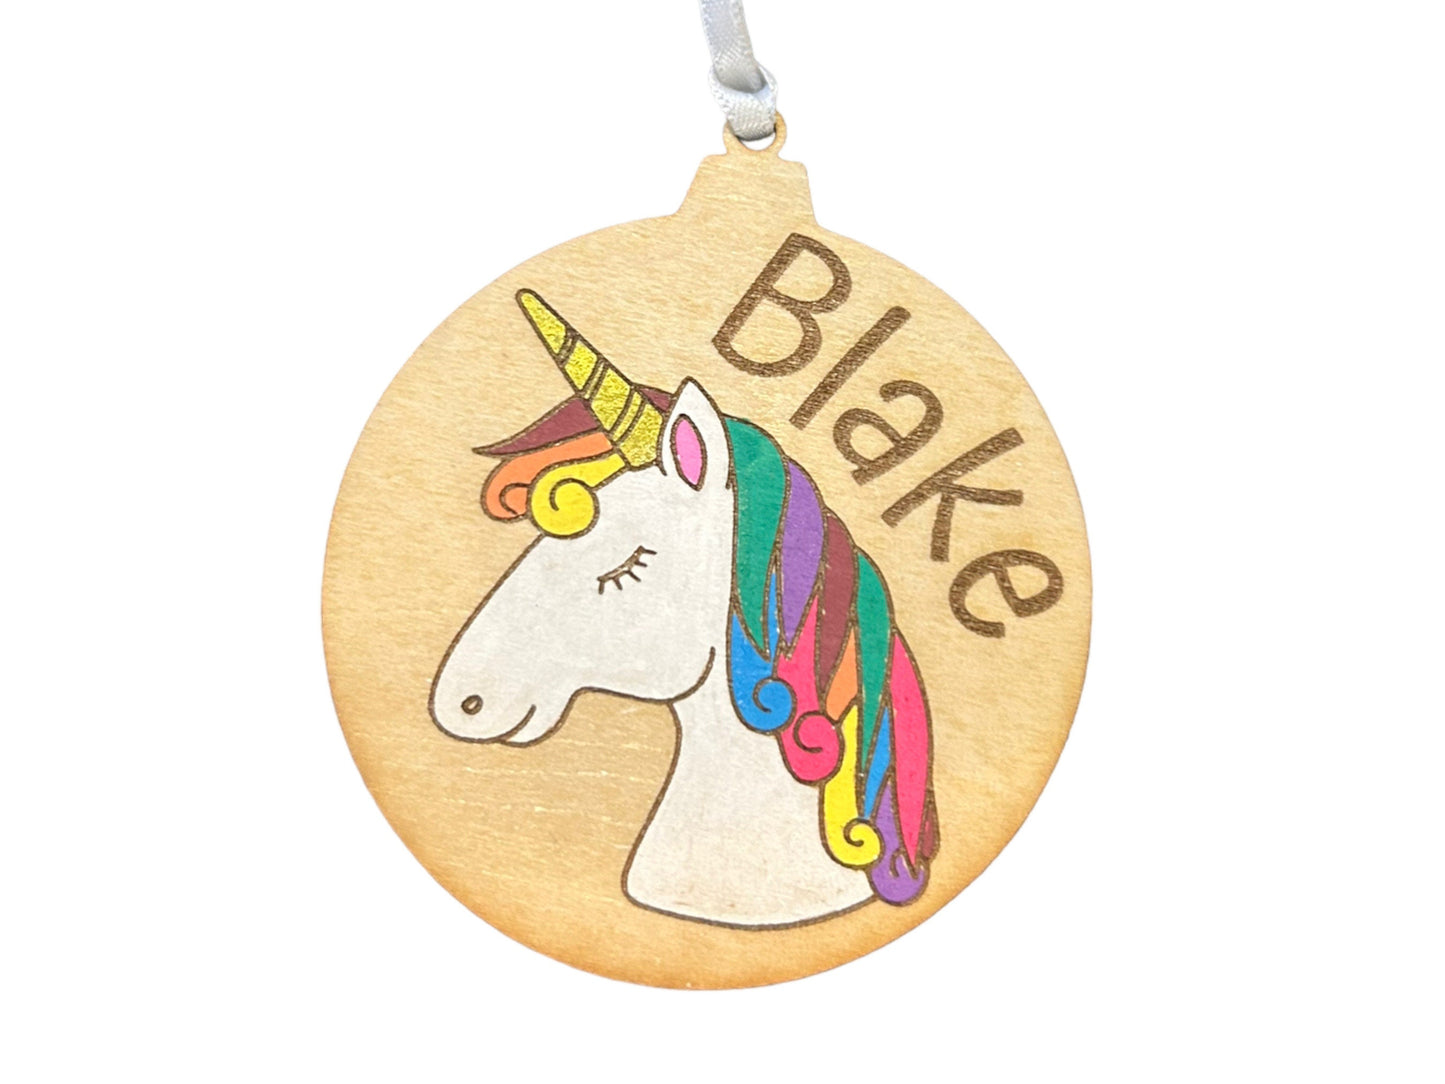 Customized Unicorn Handpainted Wooden Ornament - With Your Name!